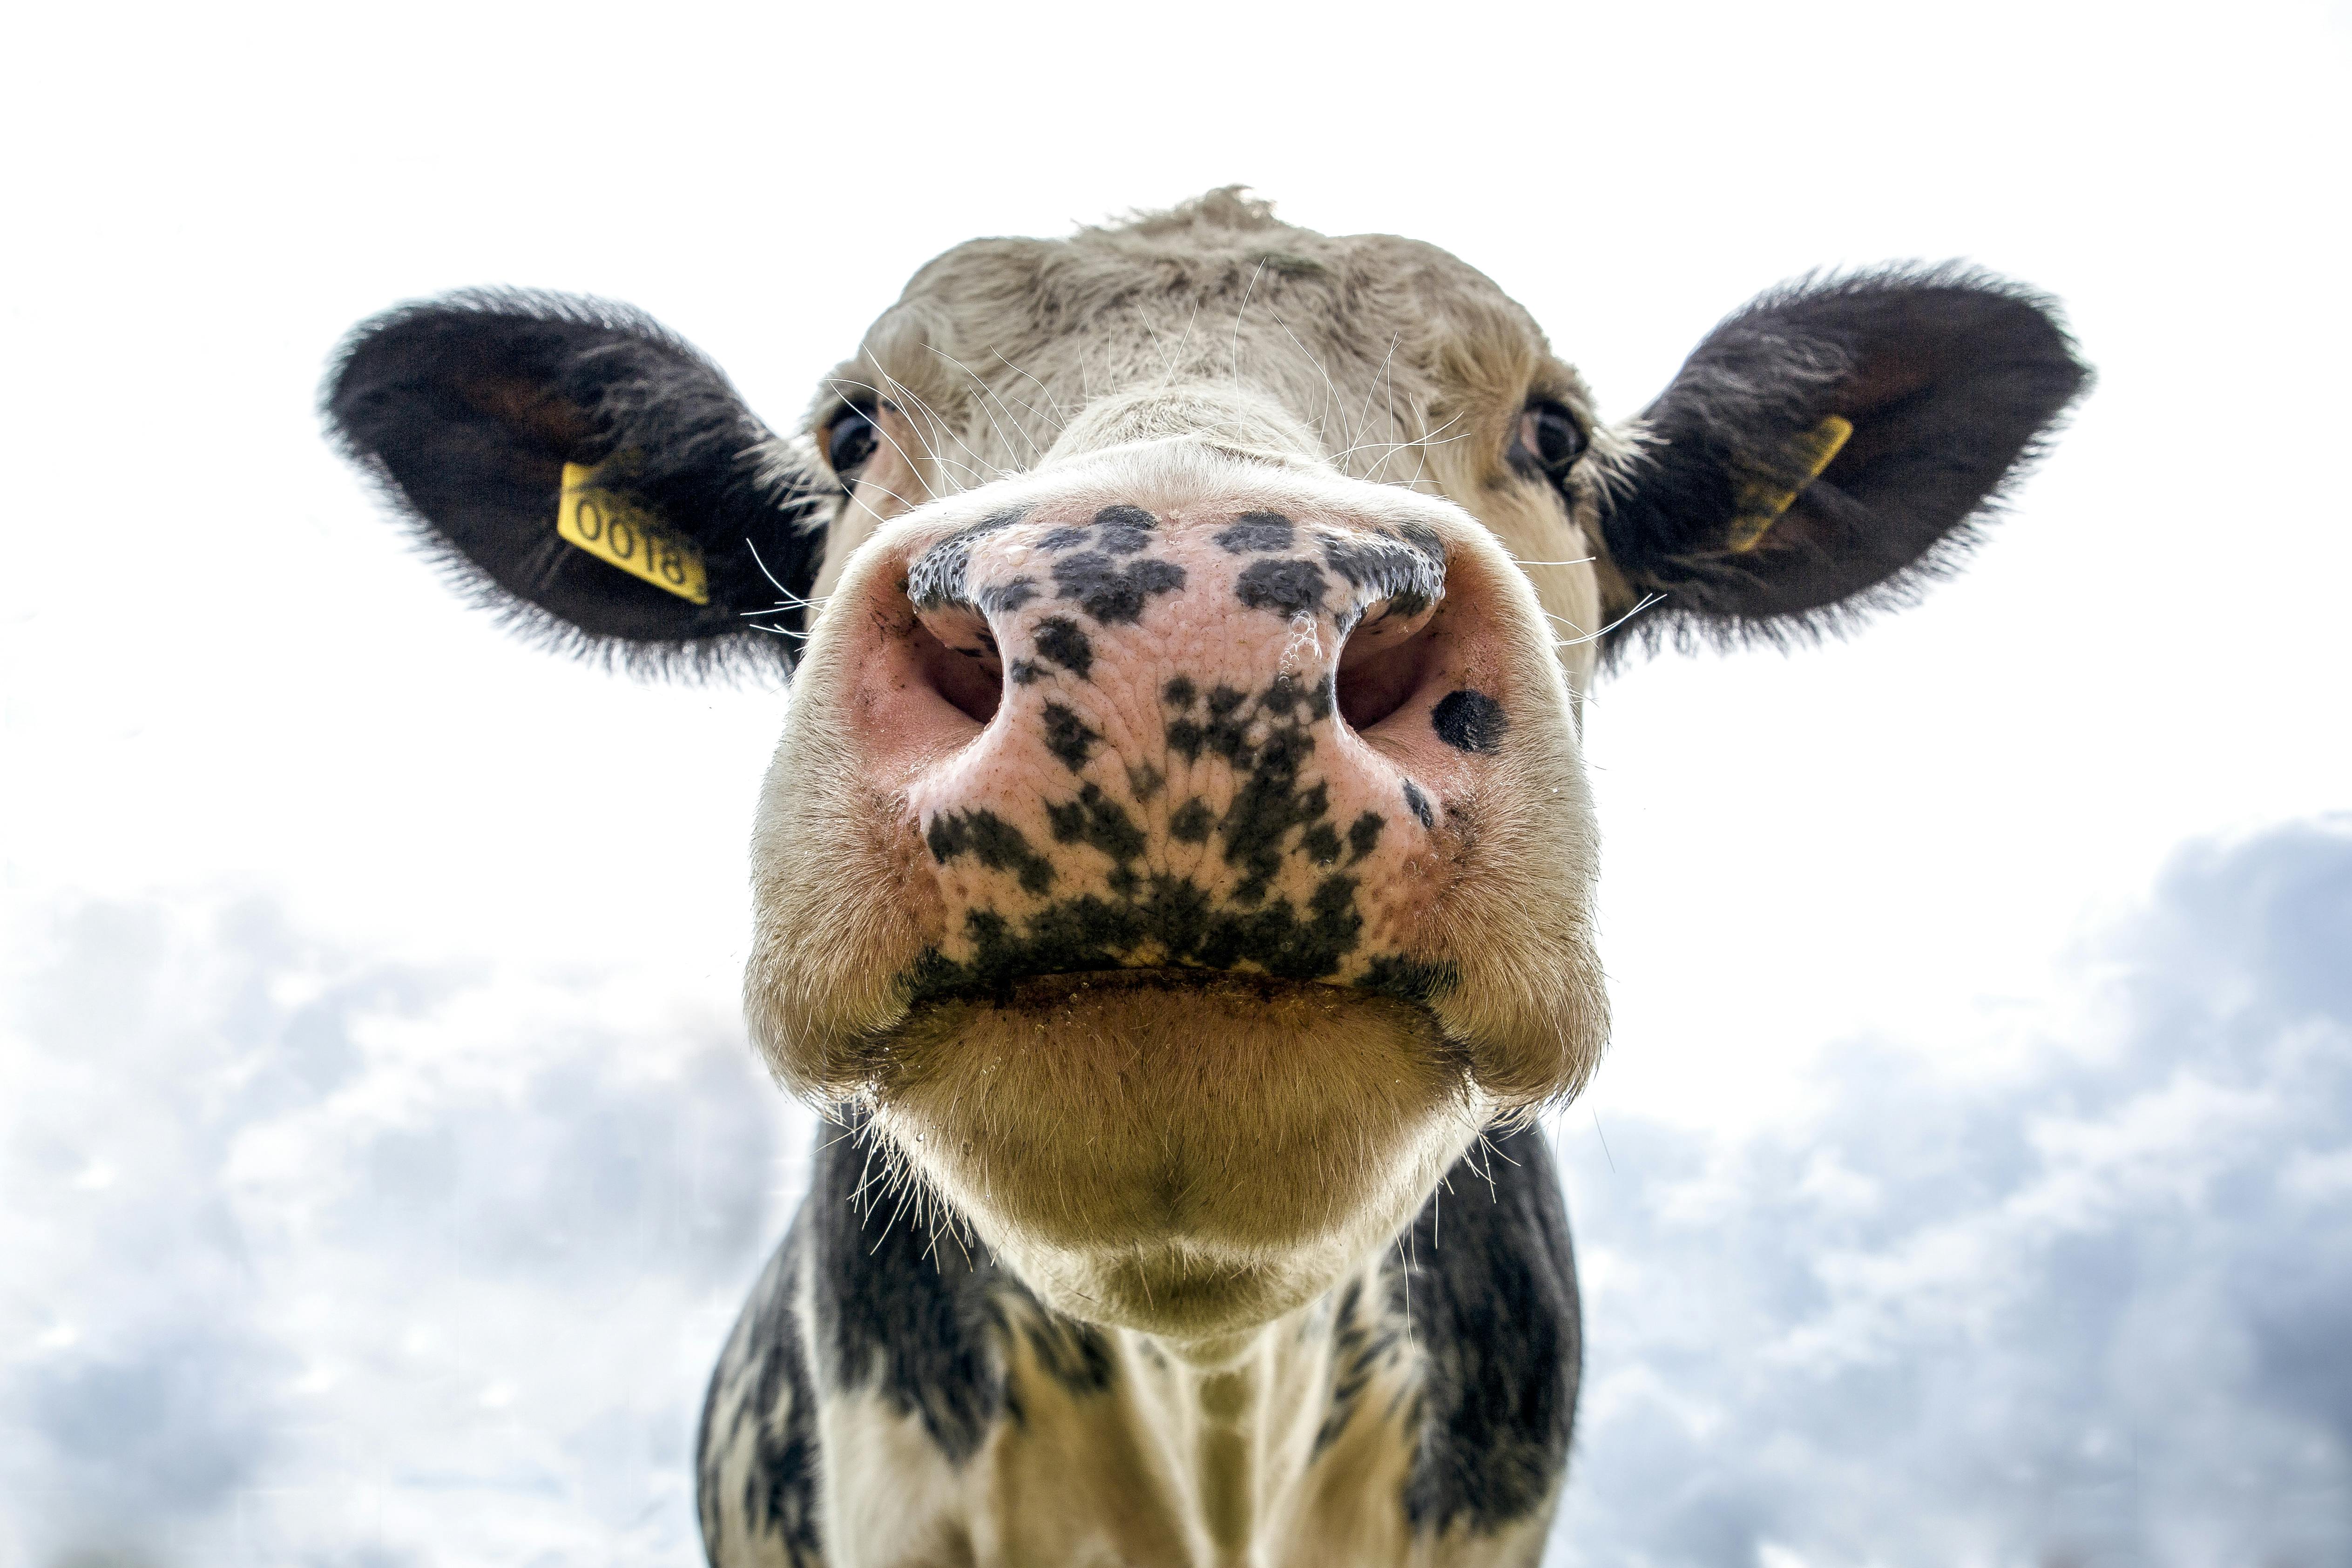 1,000+ Best Cow Images · 100% Free Download · Pexels Stock Photos